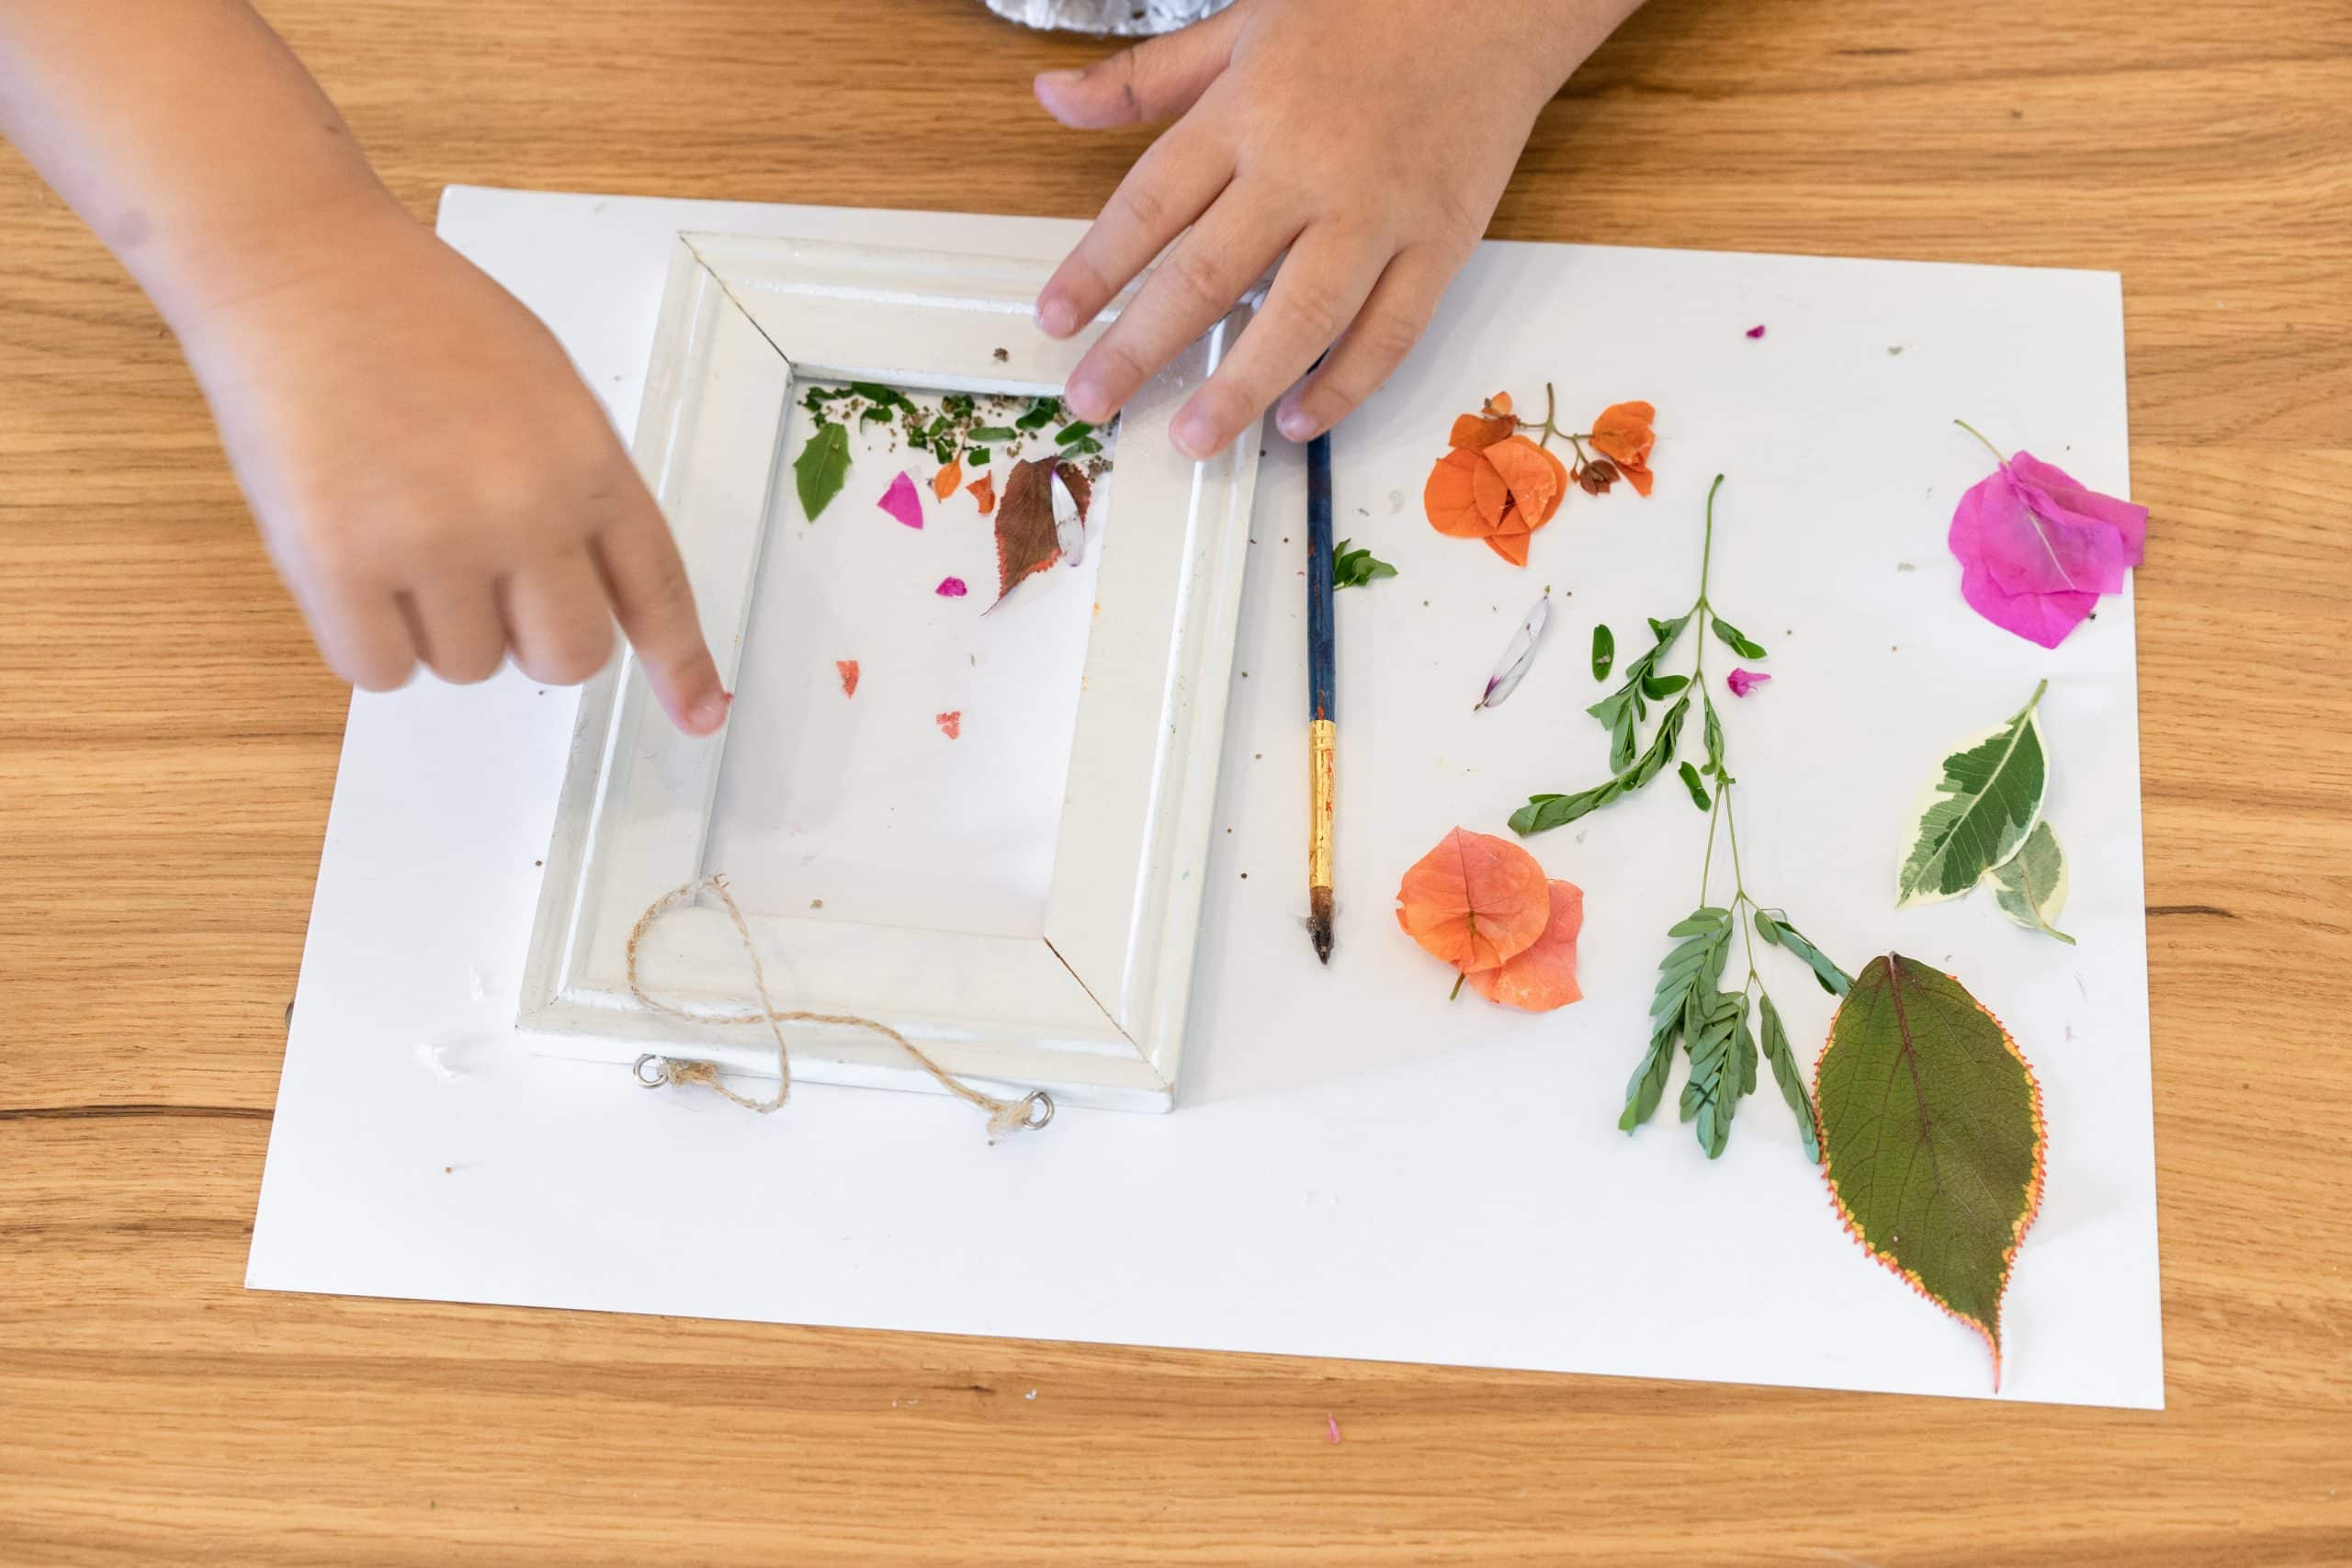 DIY Art Activities Your Kids Can Do At Home - Urgent Care for Children